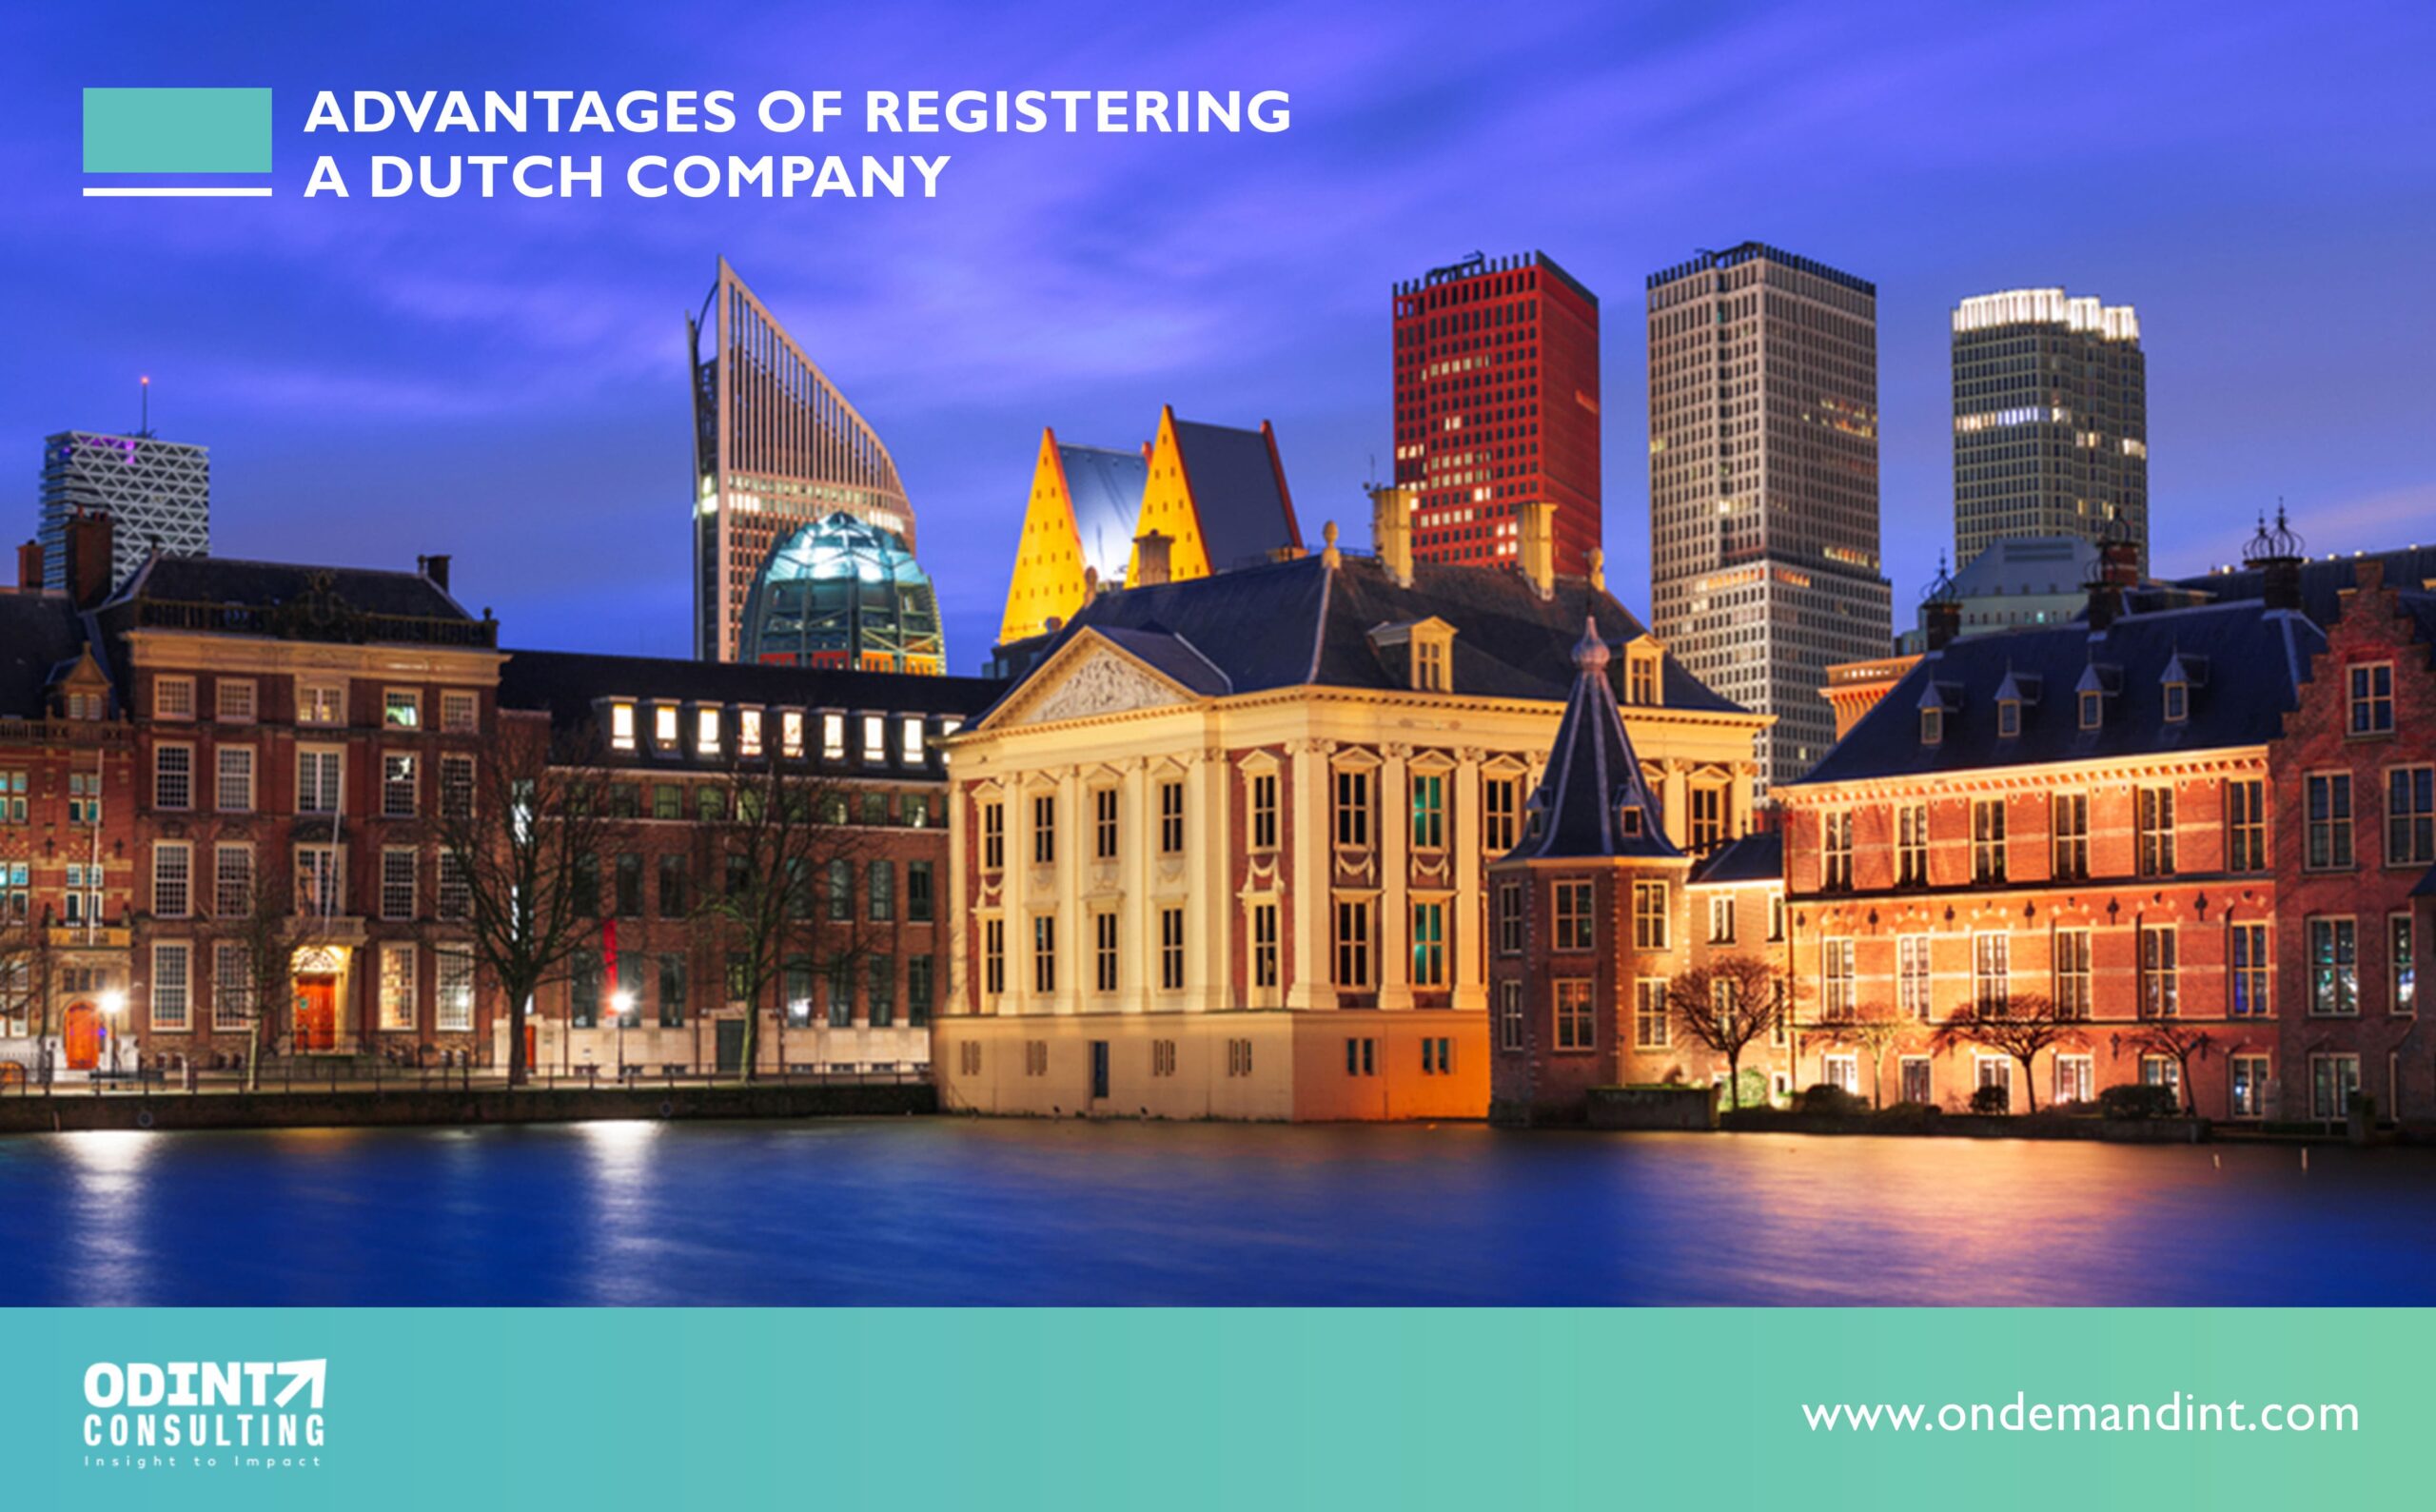 8 Advantages of Registering a Dutch Company in 2022